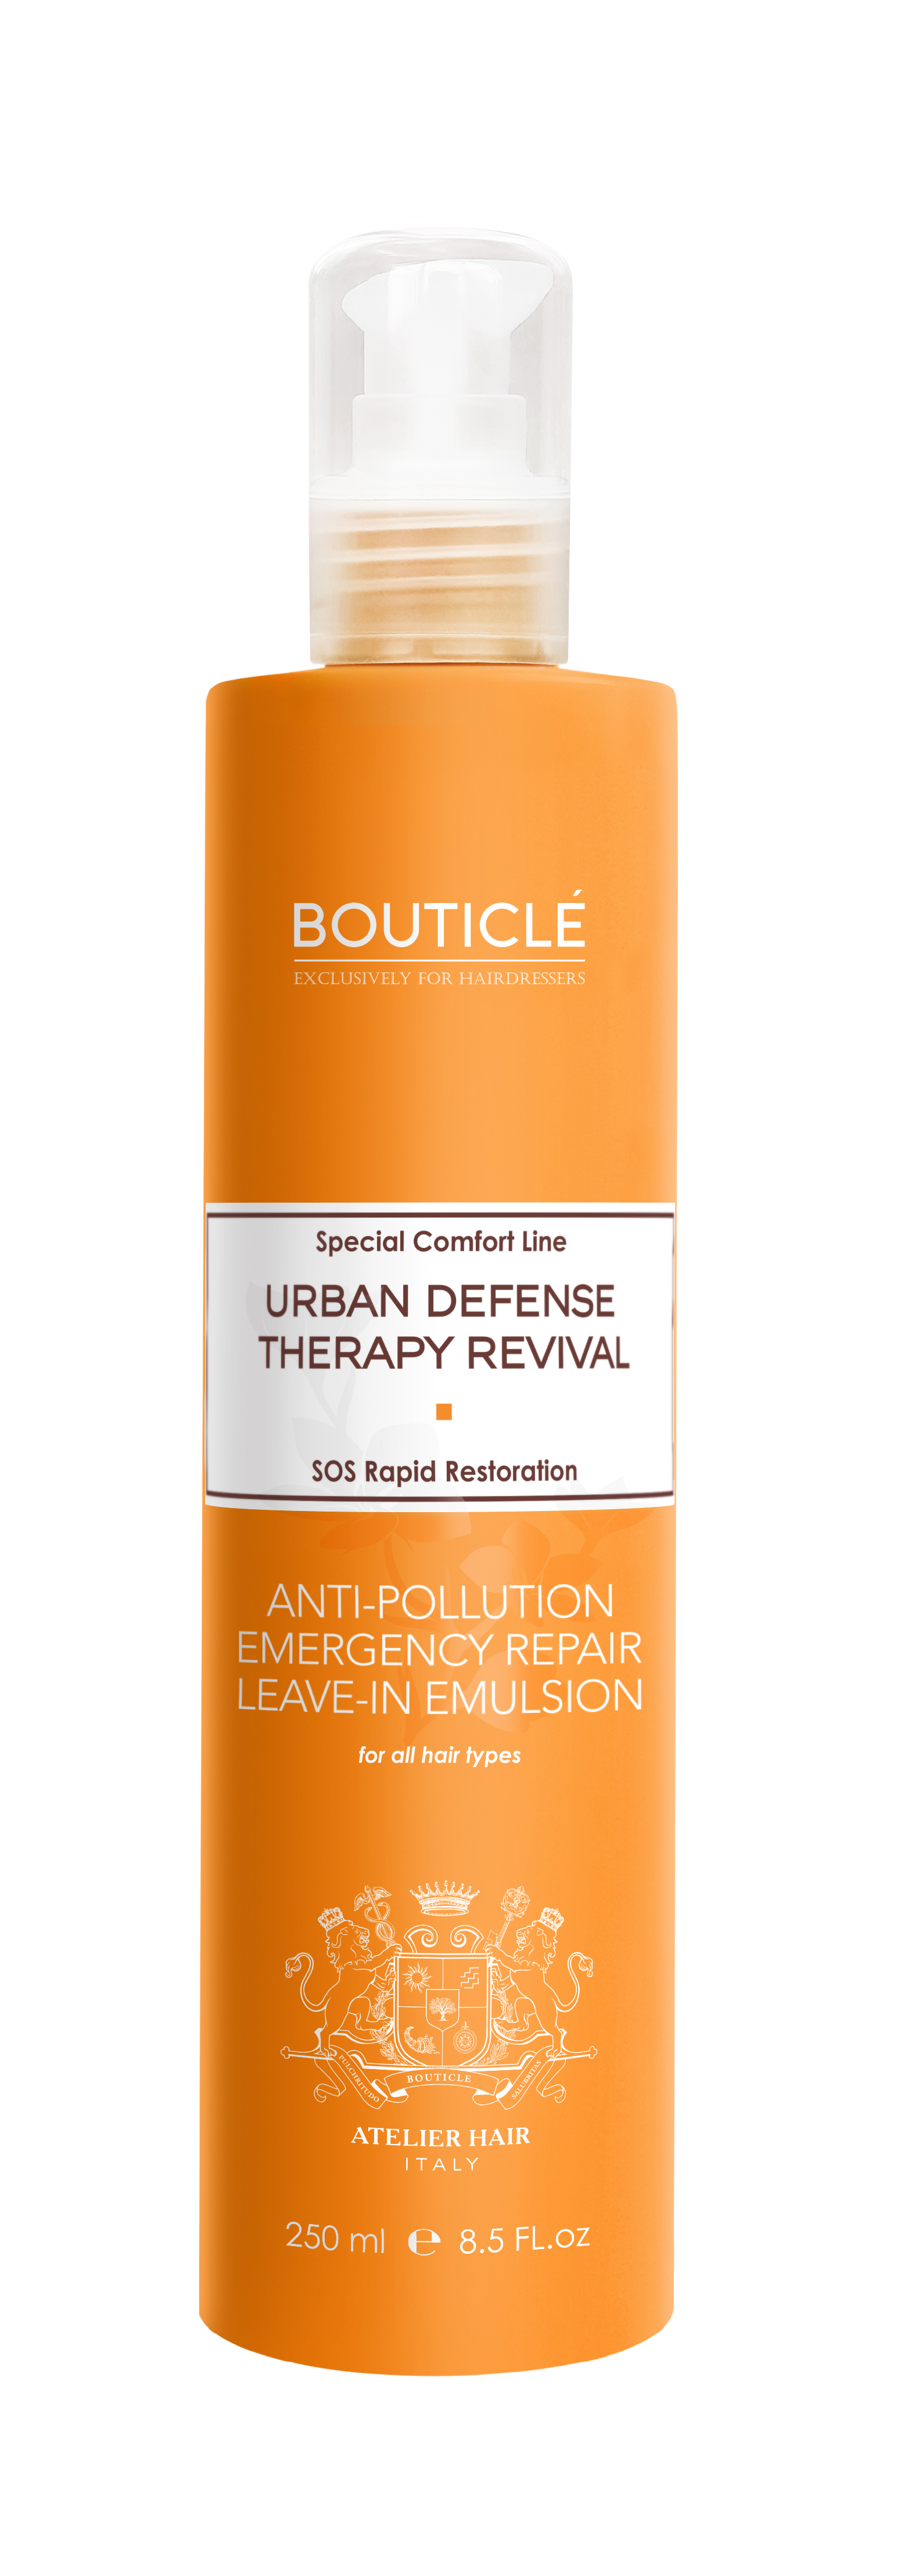 Urban_Anti-pollution emergengy repair leave-in emulsion